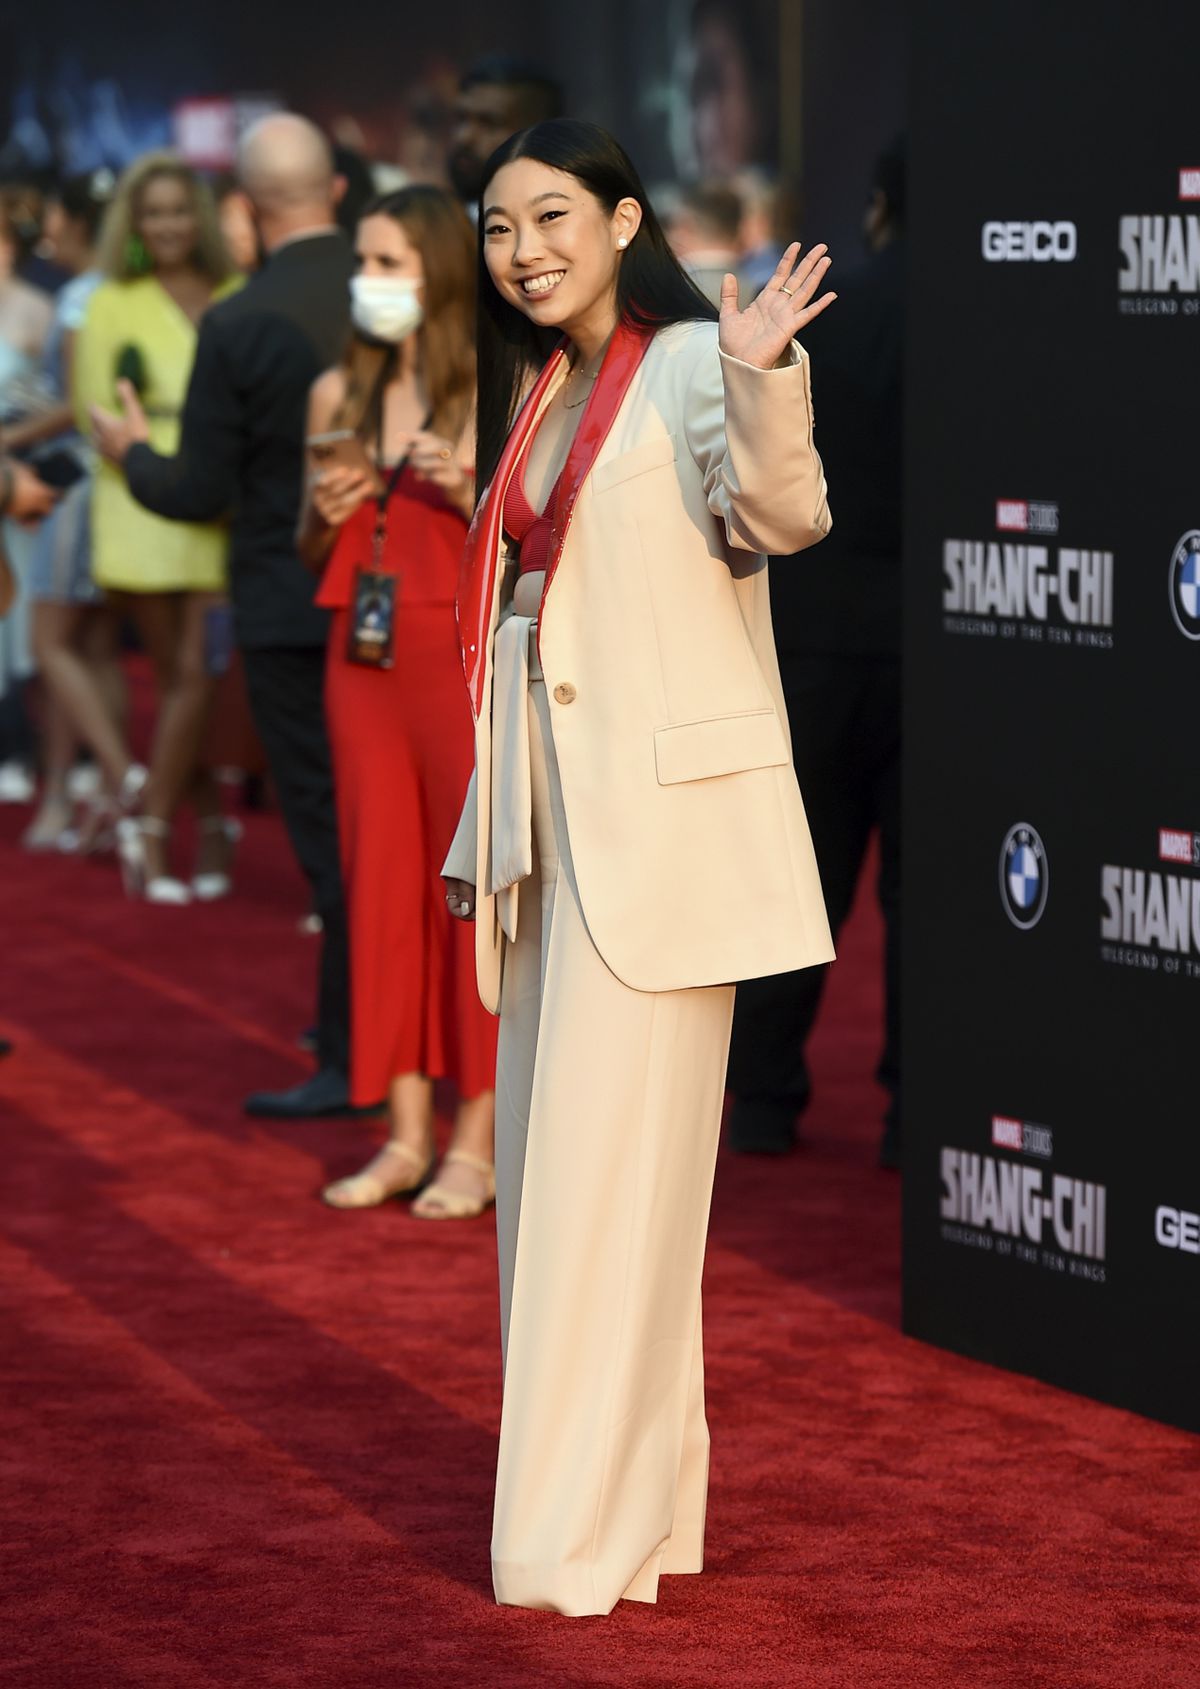 LA premiere of "Shang-Chi and the Legend of the...